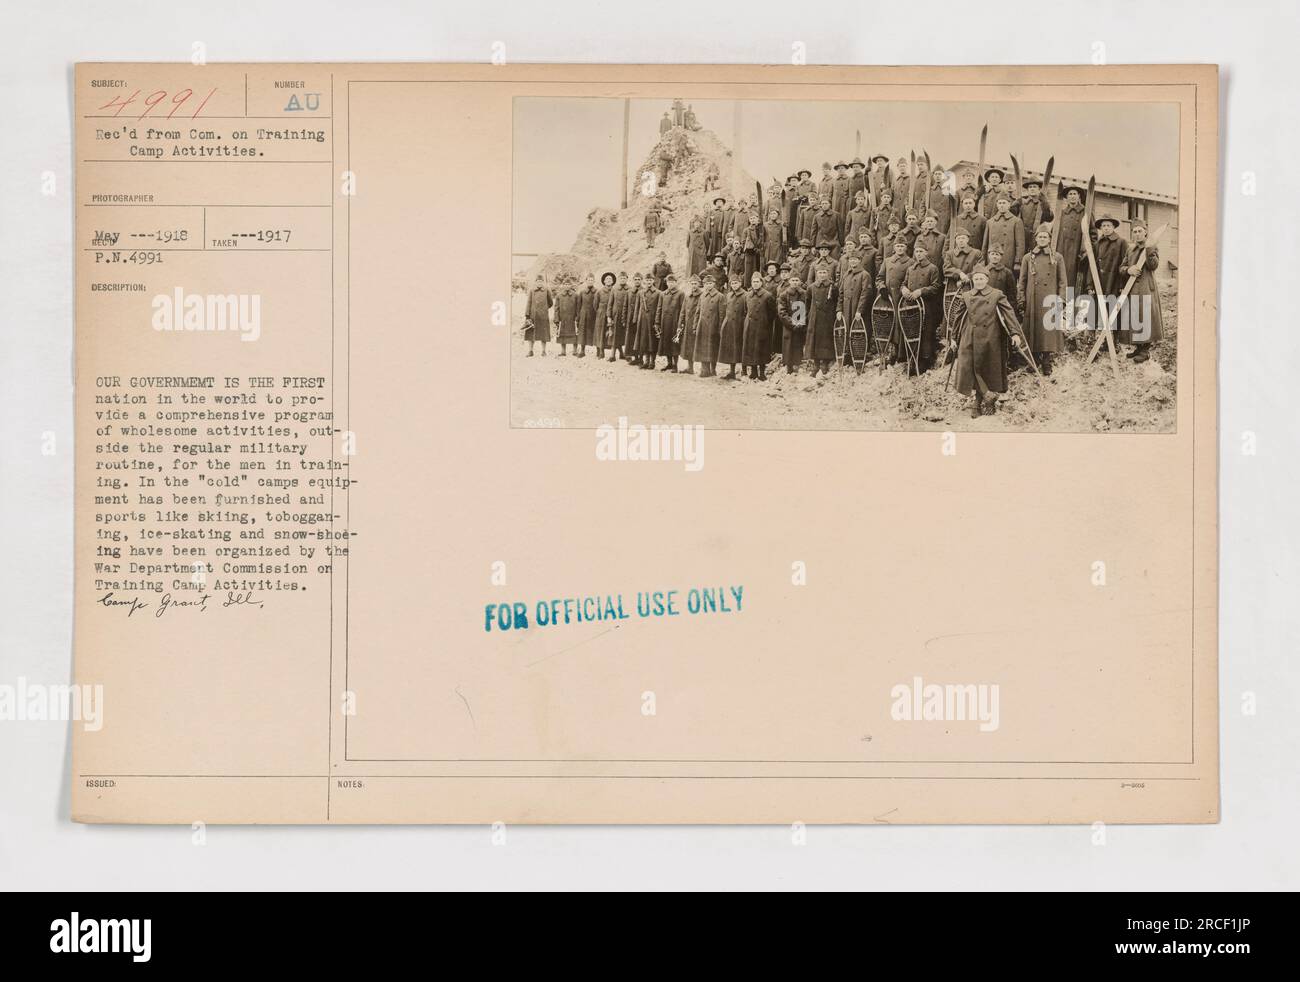 Soldiers engaged in winter activities, including skiing, tobogganing, ice-skating, and snowshoeing, organized by the War Department Commission on Training Camp Activities in 1917. This program provided recreational opportunities for soldiers outside of their military duties, making the United States the first country to offer such comprehensive activities for its military personnel. Image number: 111-SC-4991. Stock Photo